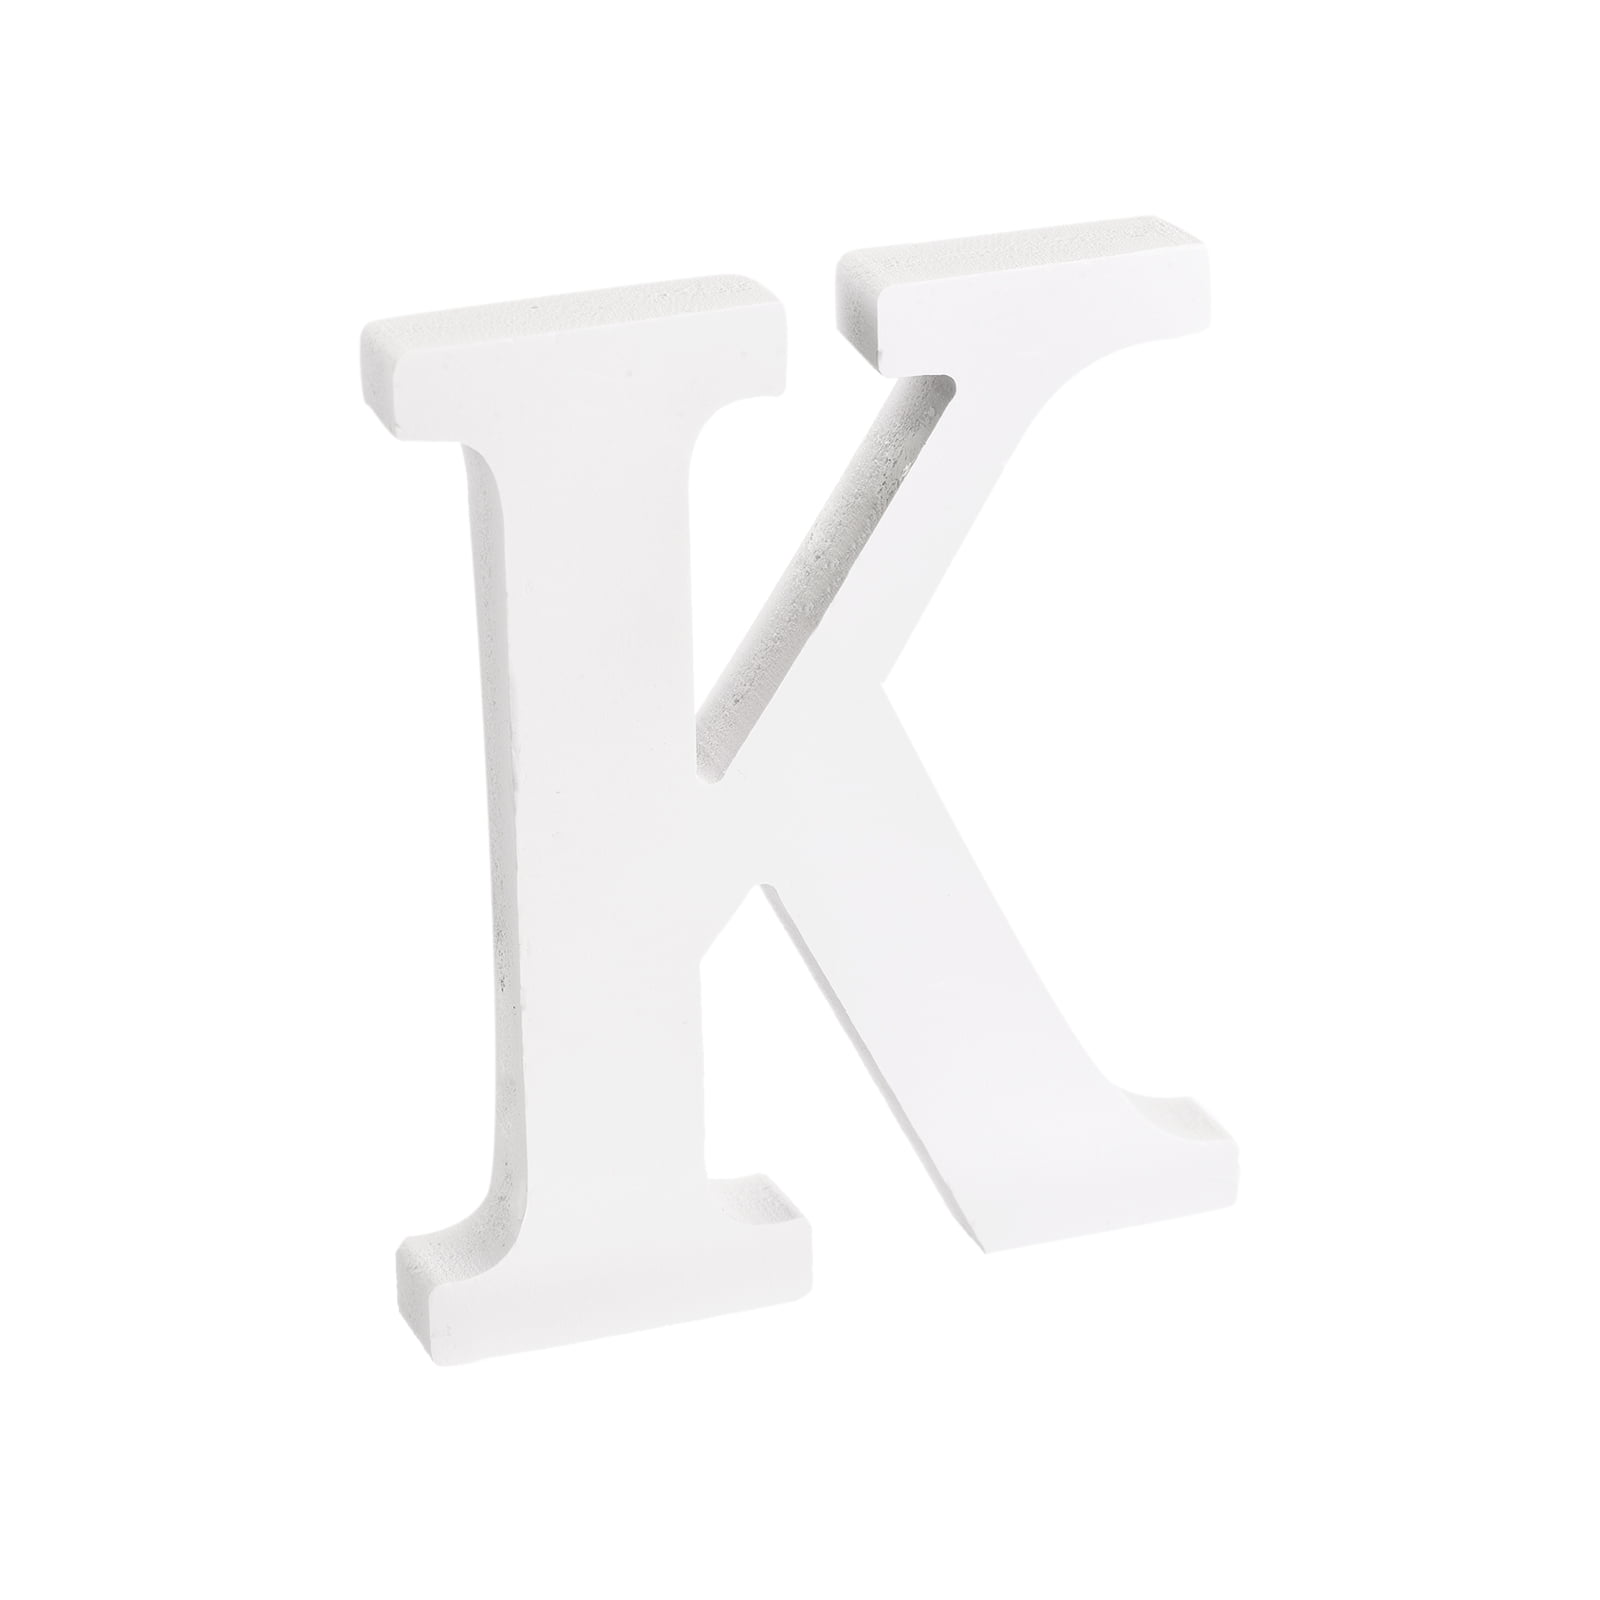 White Wood Letters 3 inch, Wood Letters for DIY Party Projects (K)